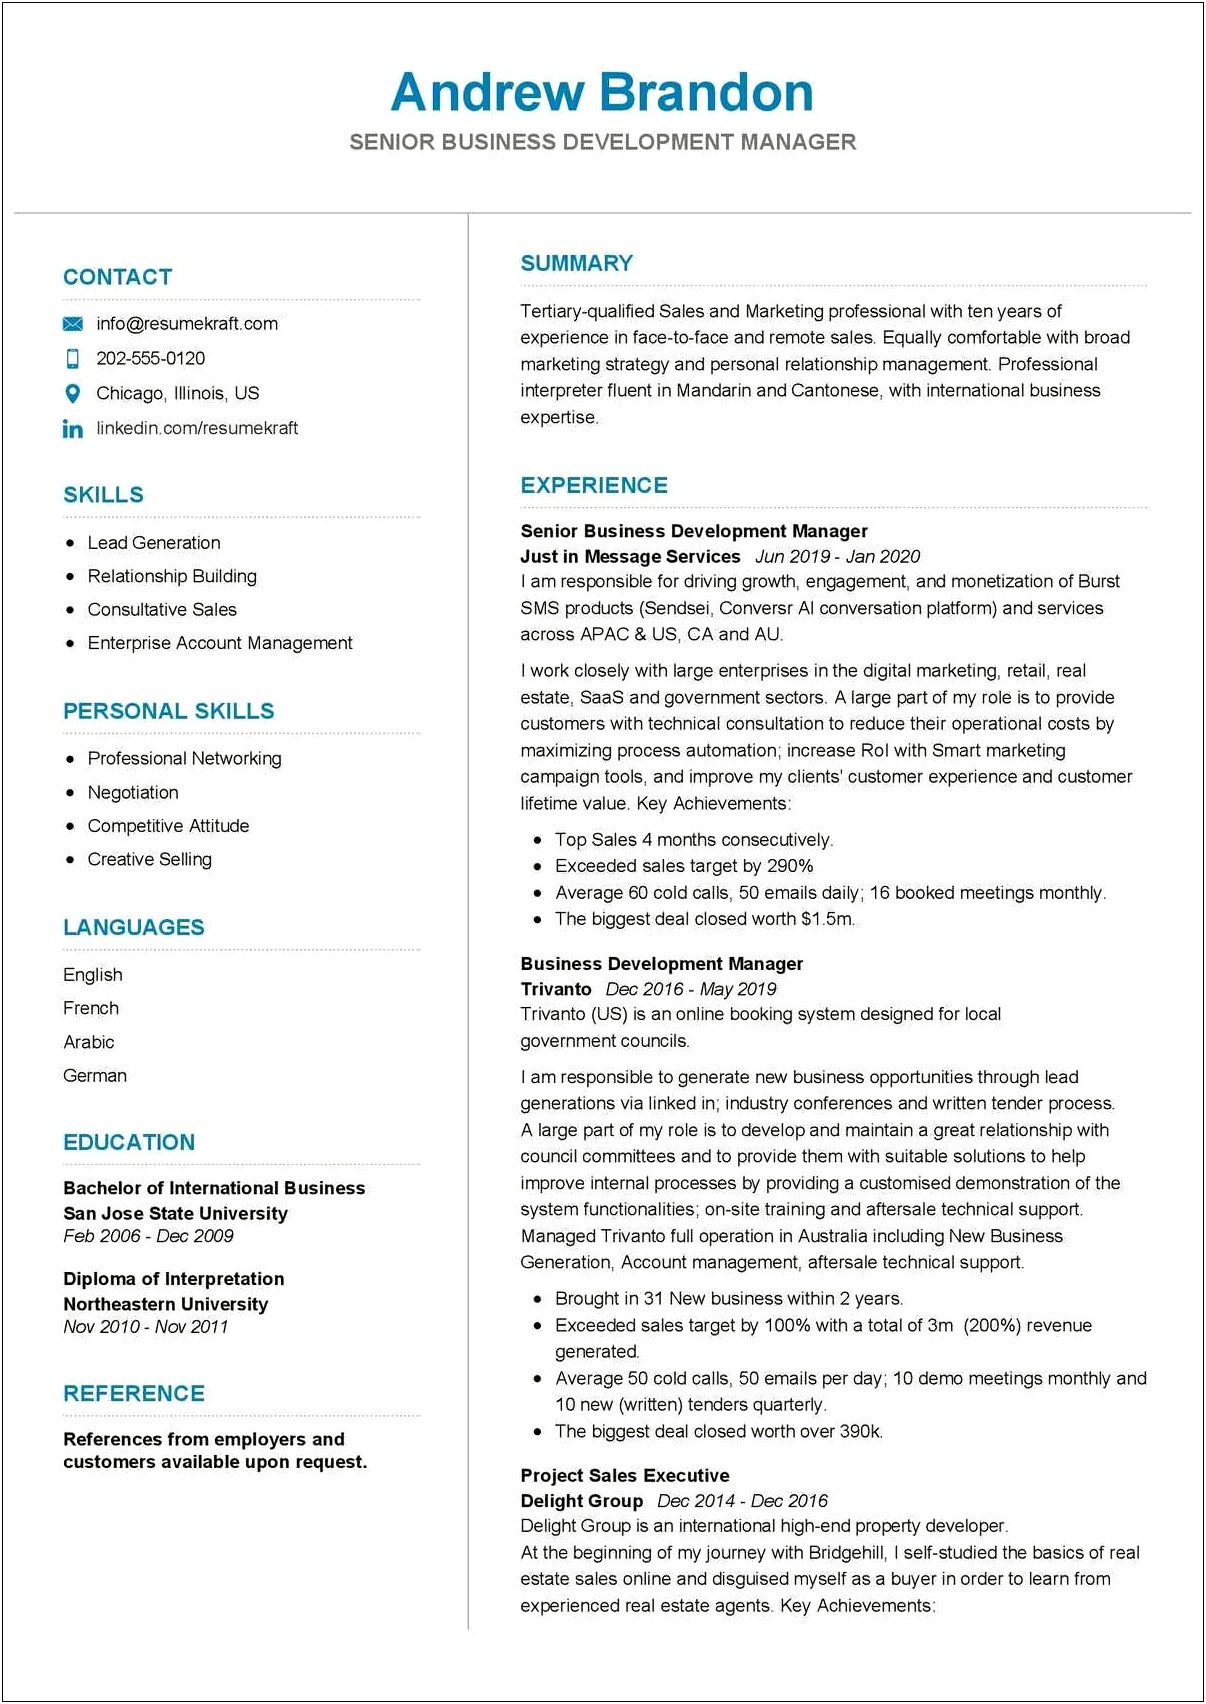 Sample Resume For Training And Development Executive